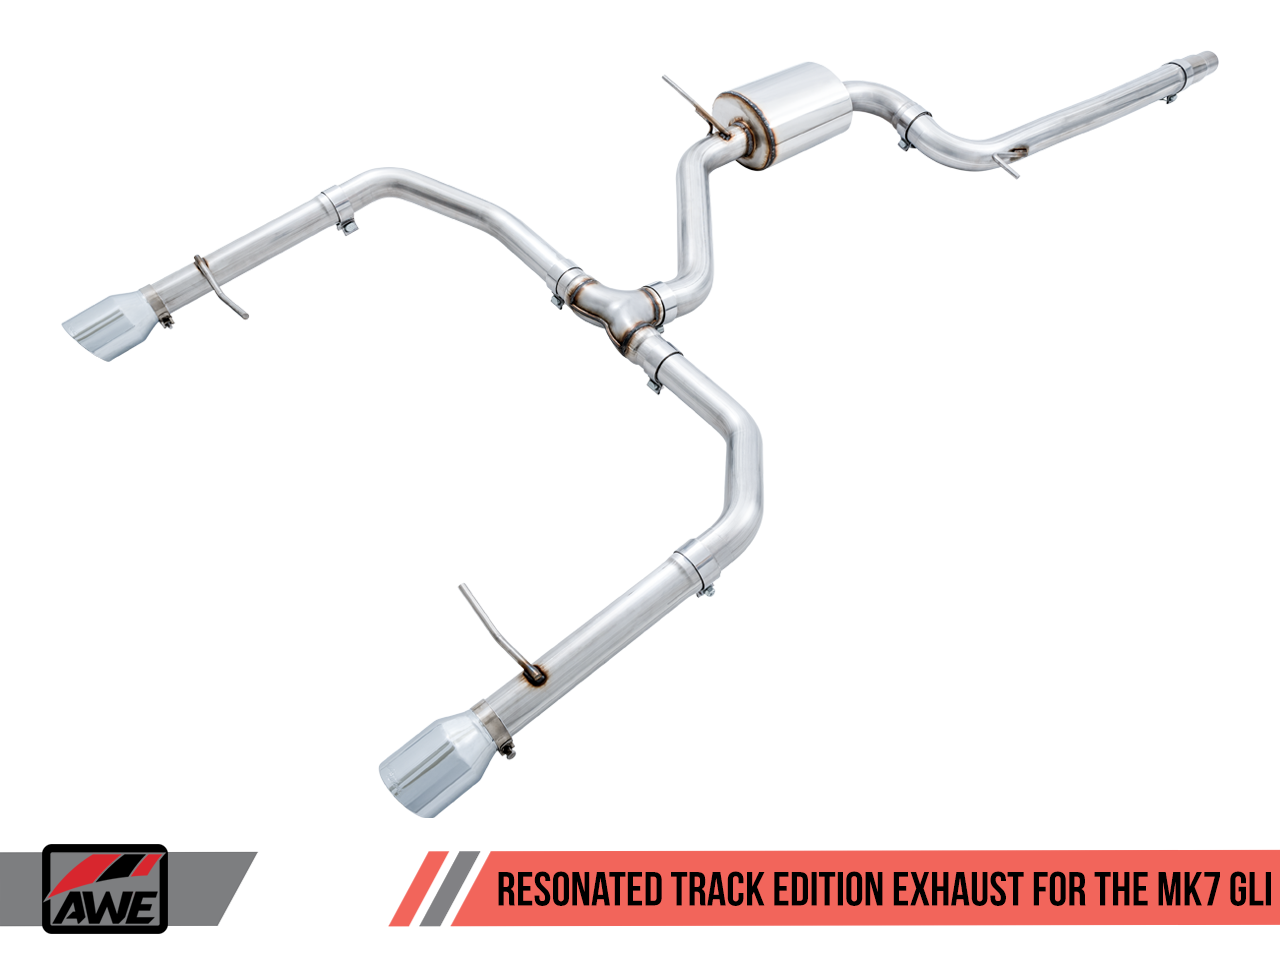 AWE Track Edition Exhaust - Resonated - for MK7 Jetta GLI w/ High Flow Downpipe (not included) - Chrome Silver Tips